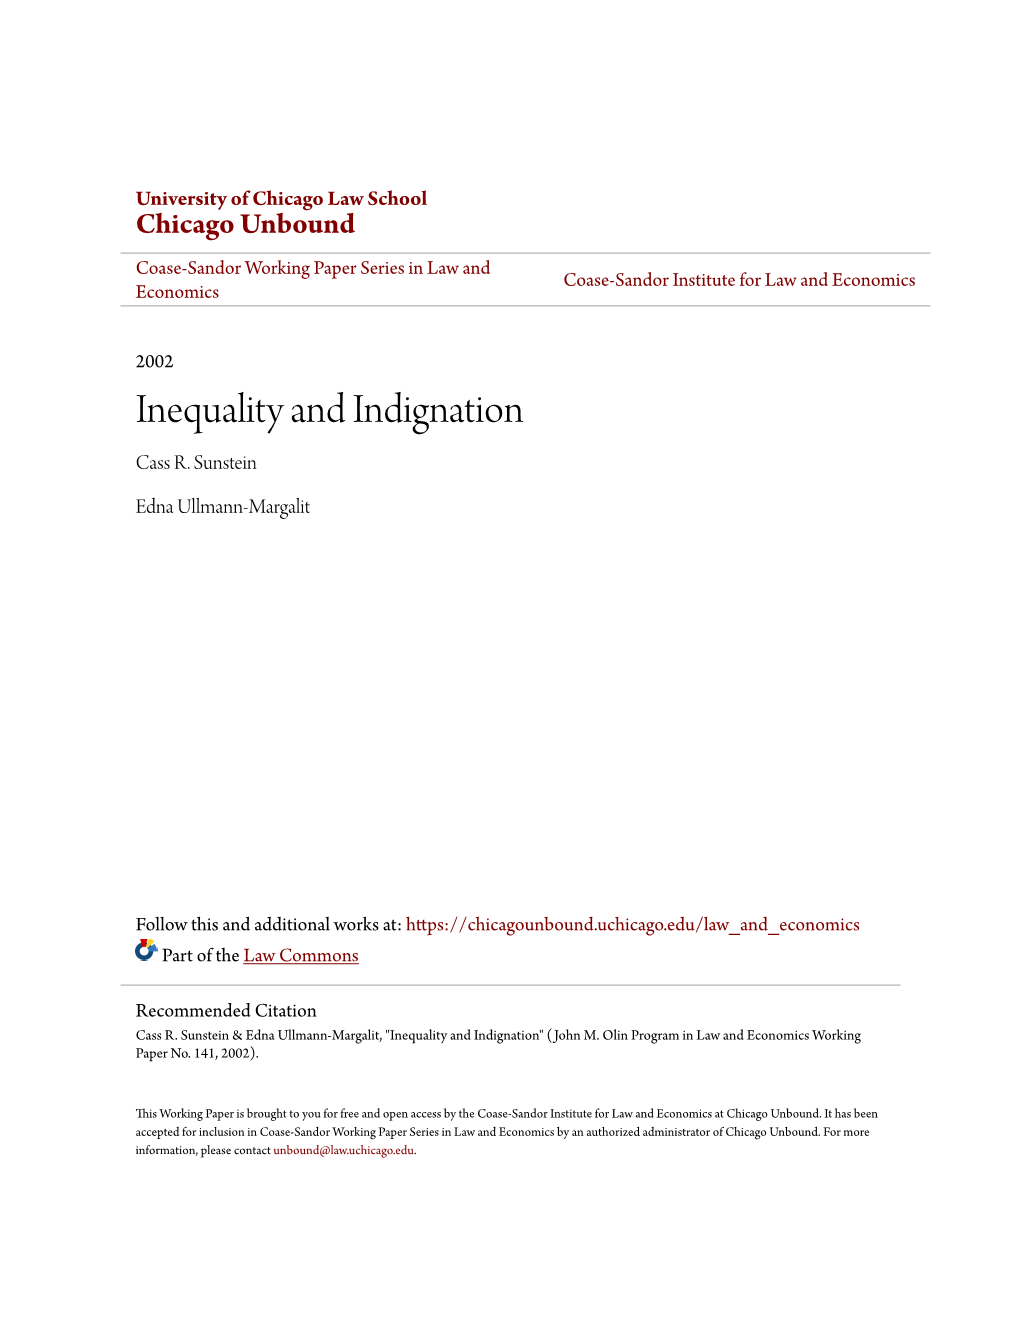 Inequality and Indignation Cass R